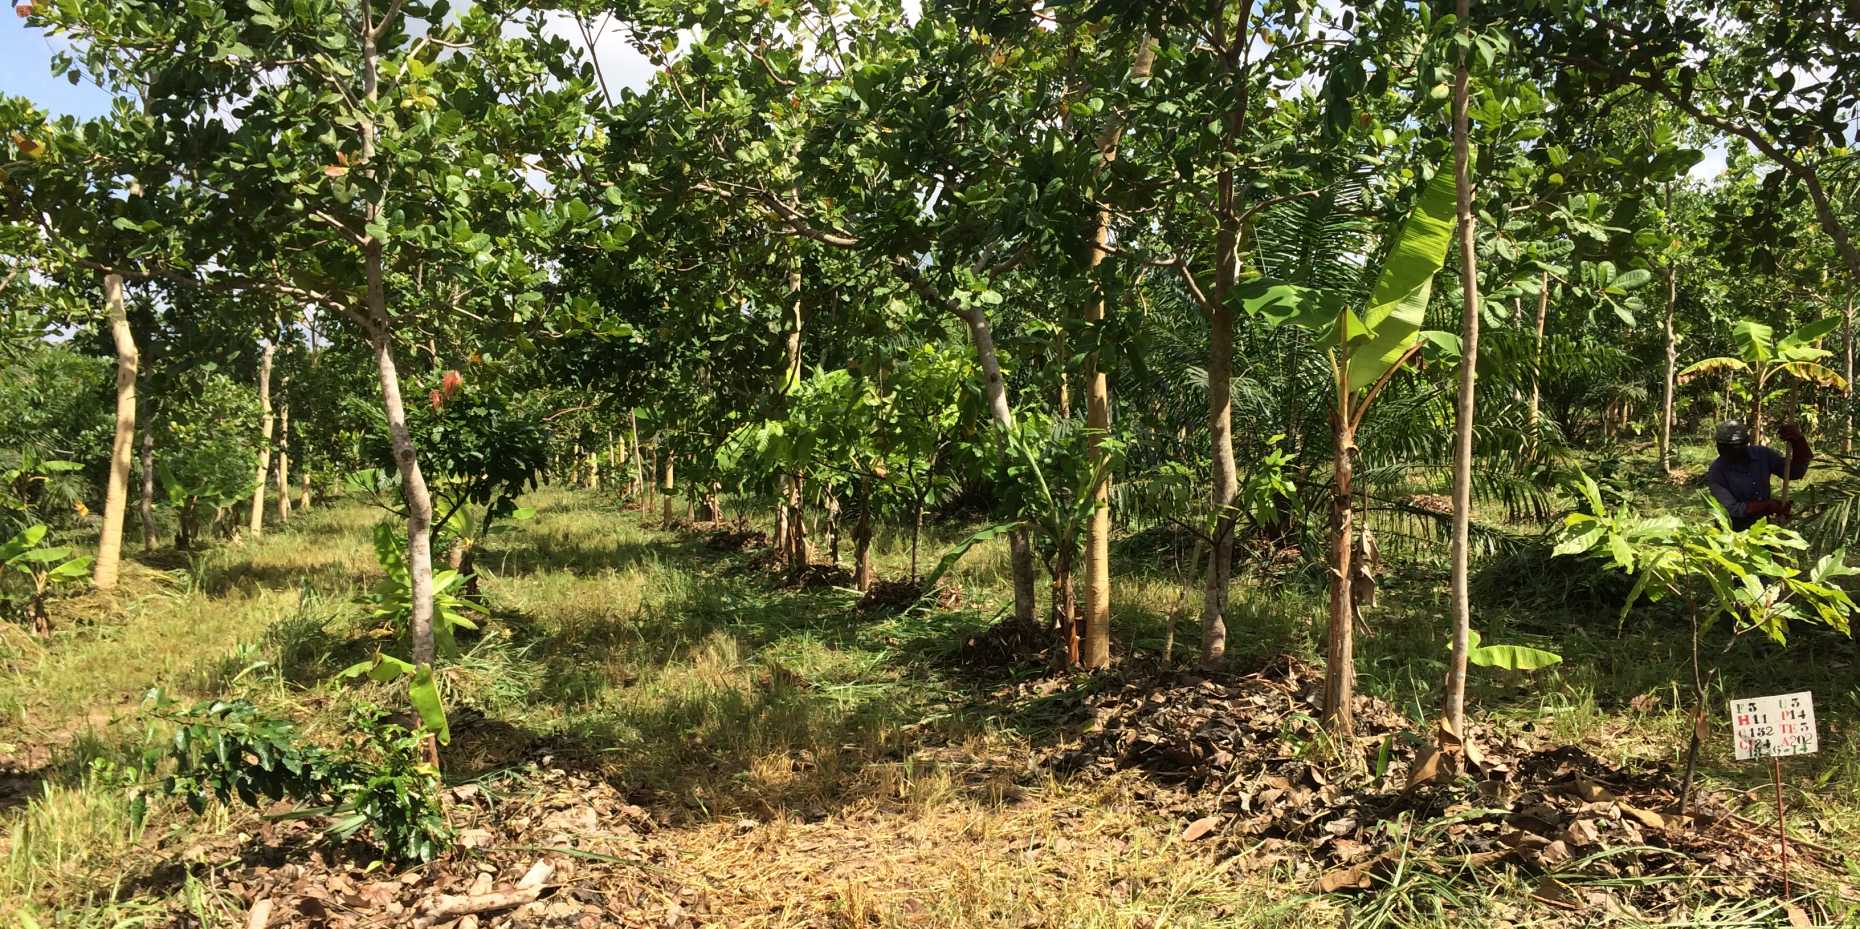 Enlarged view: Agroforestry 